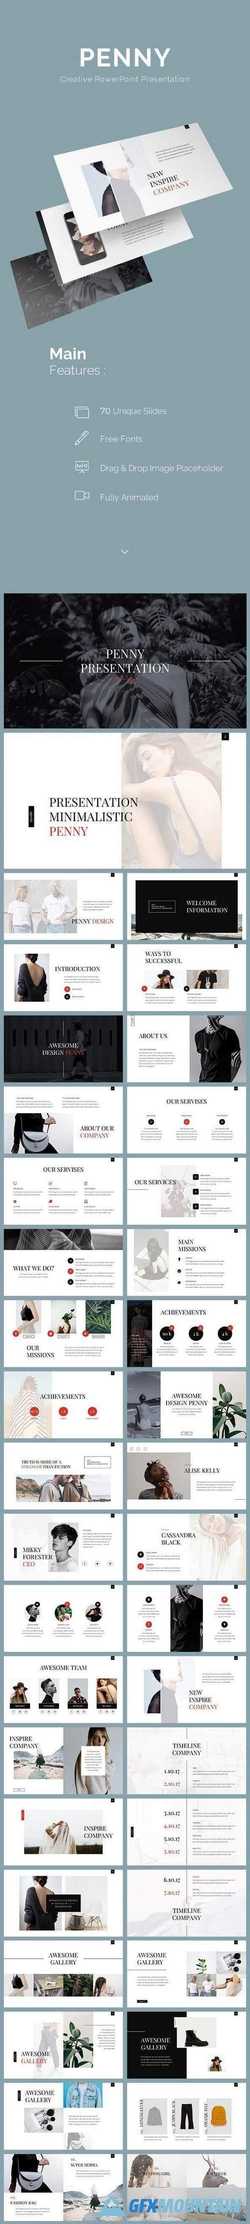 Penny PowerPoint Template 21288161